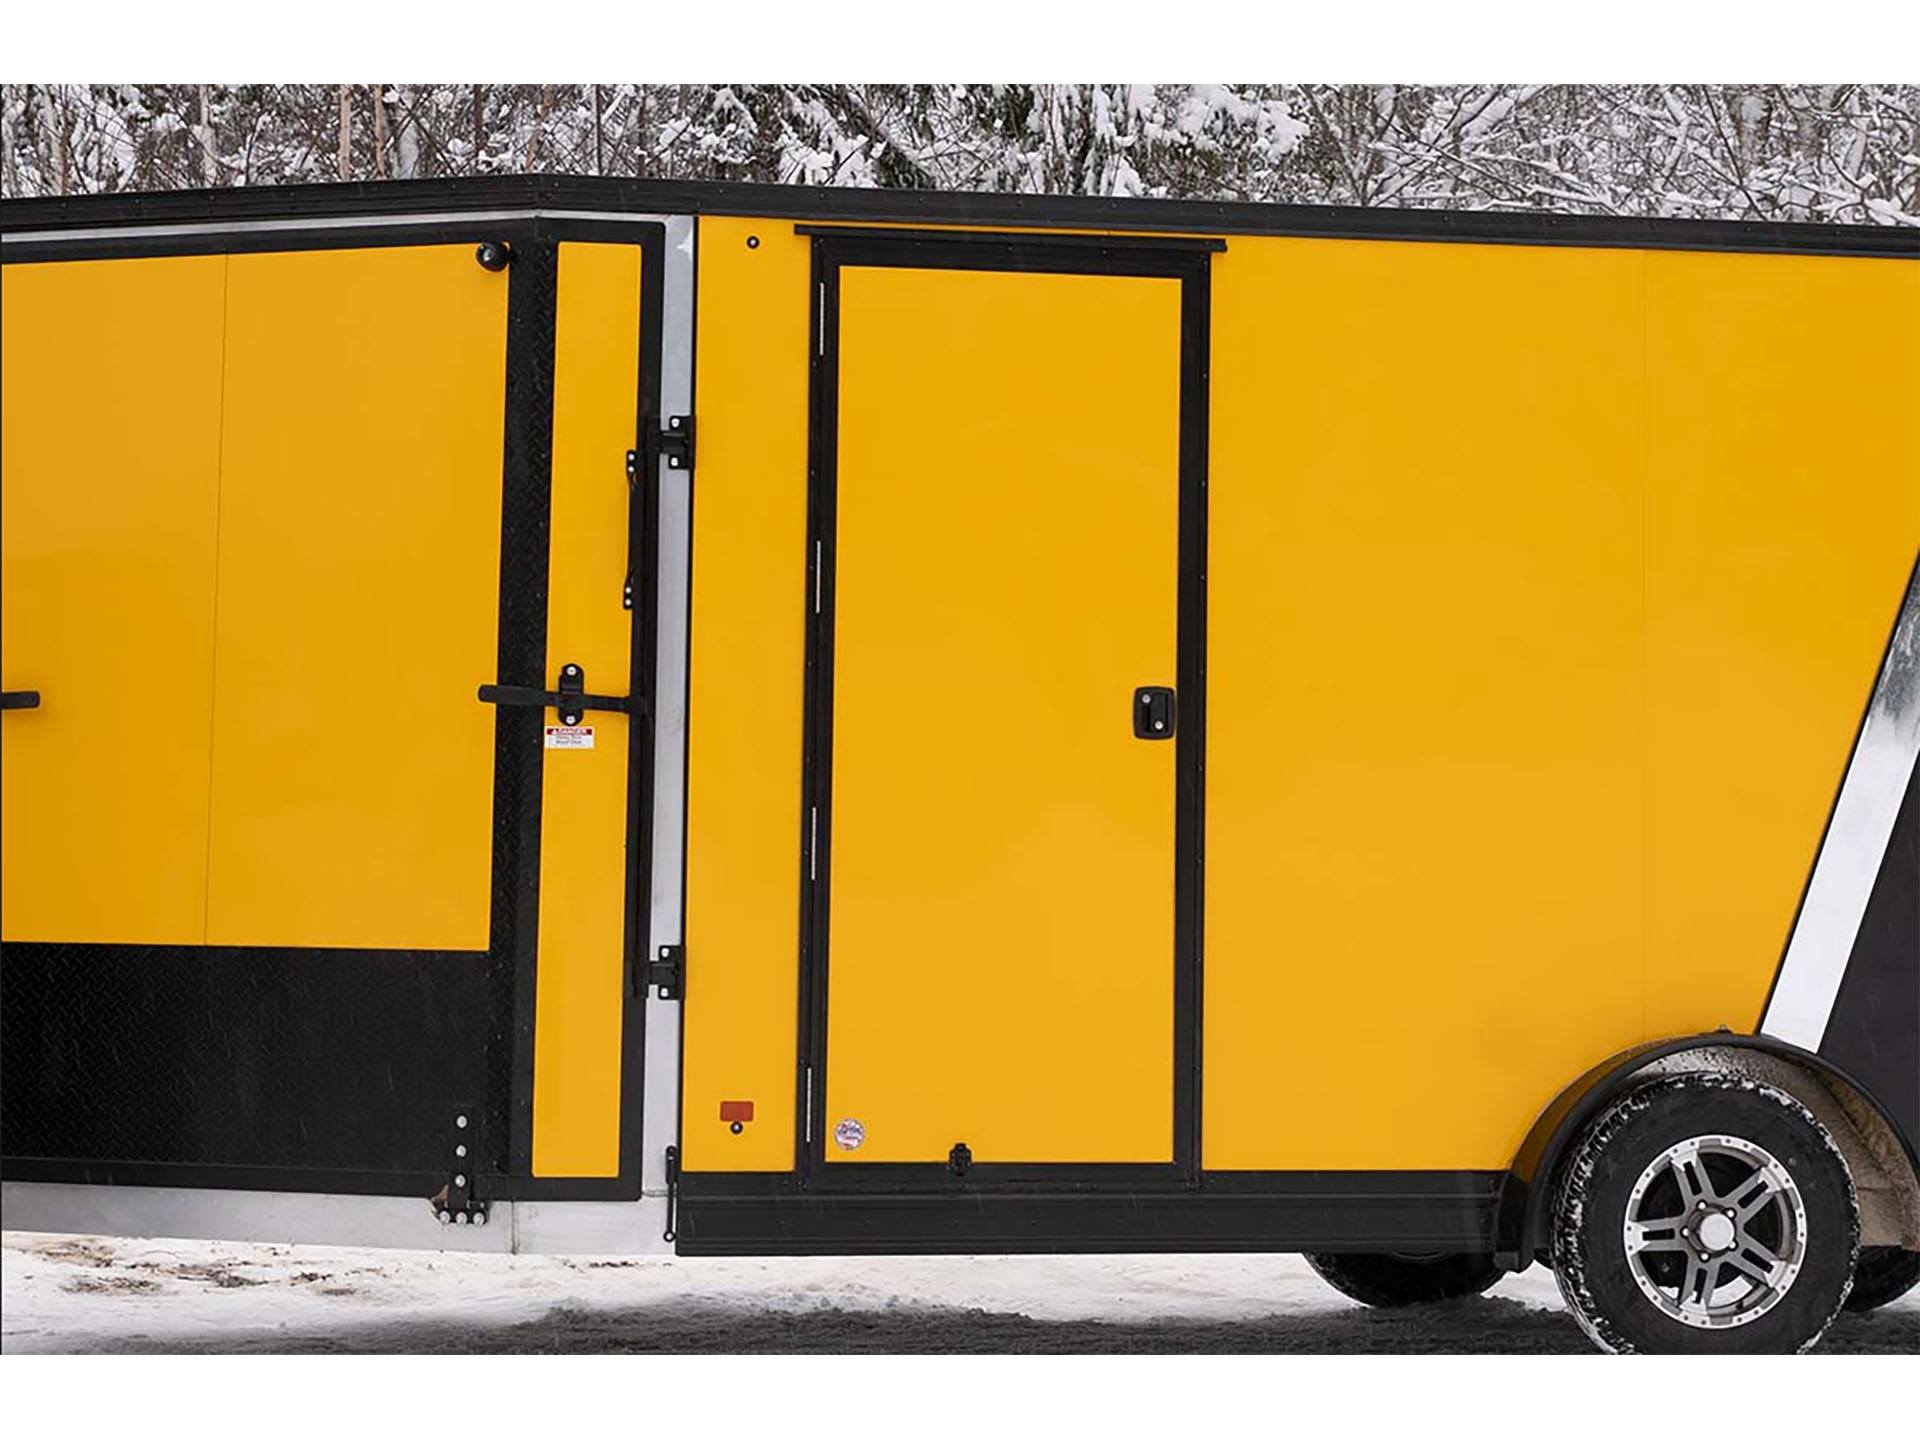 2024 Polaris Trailers Enclosed Elite Limited Snow Trailers 7 ft. Wide - 14 ft. Long in Unionville, Virginia